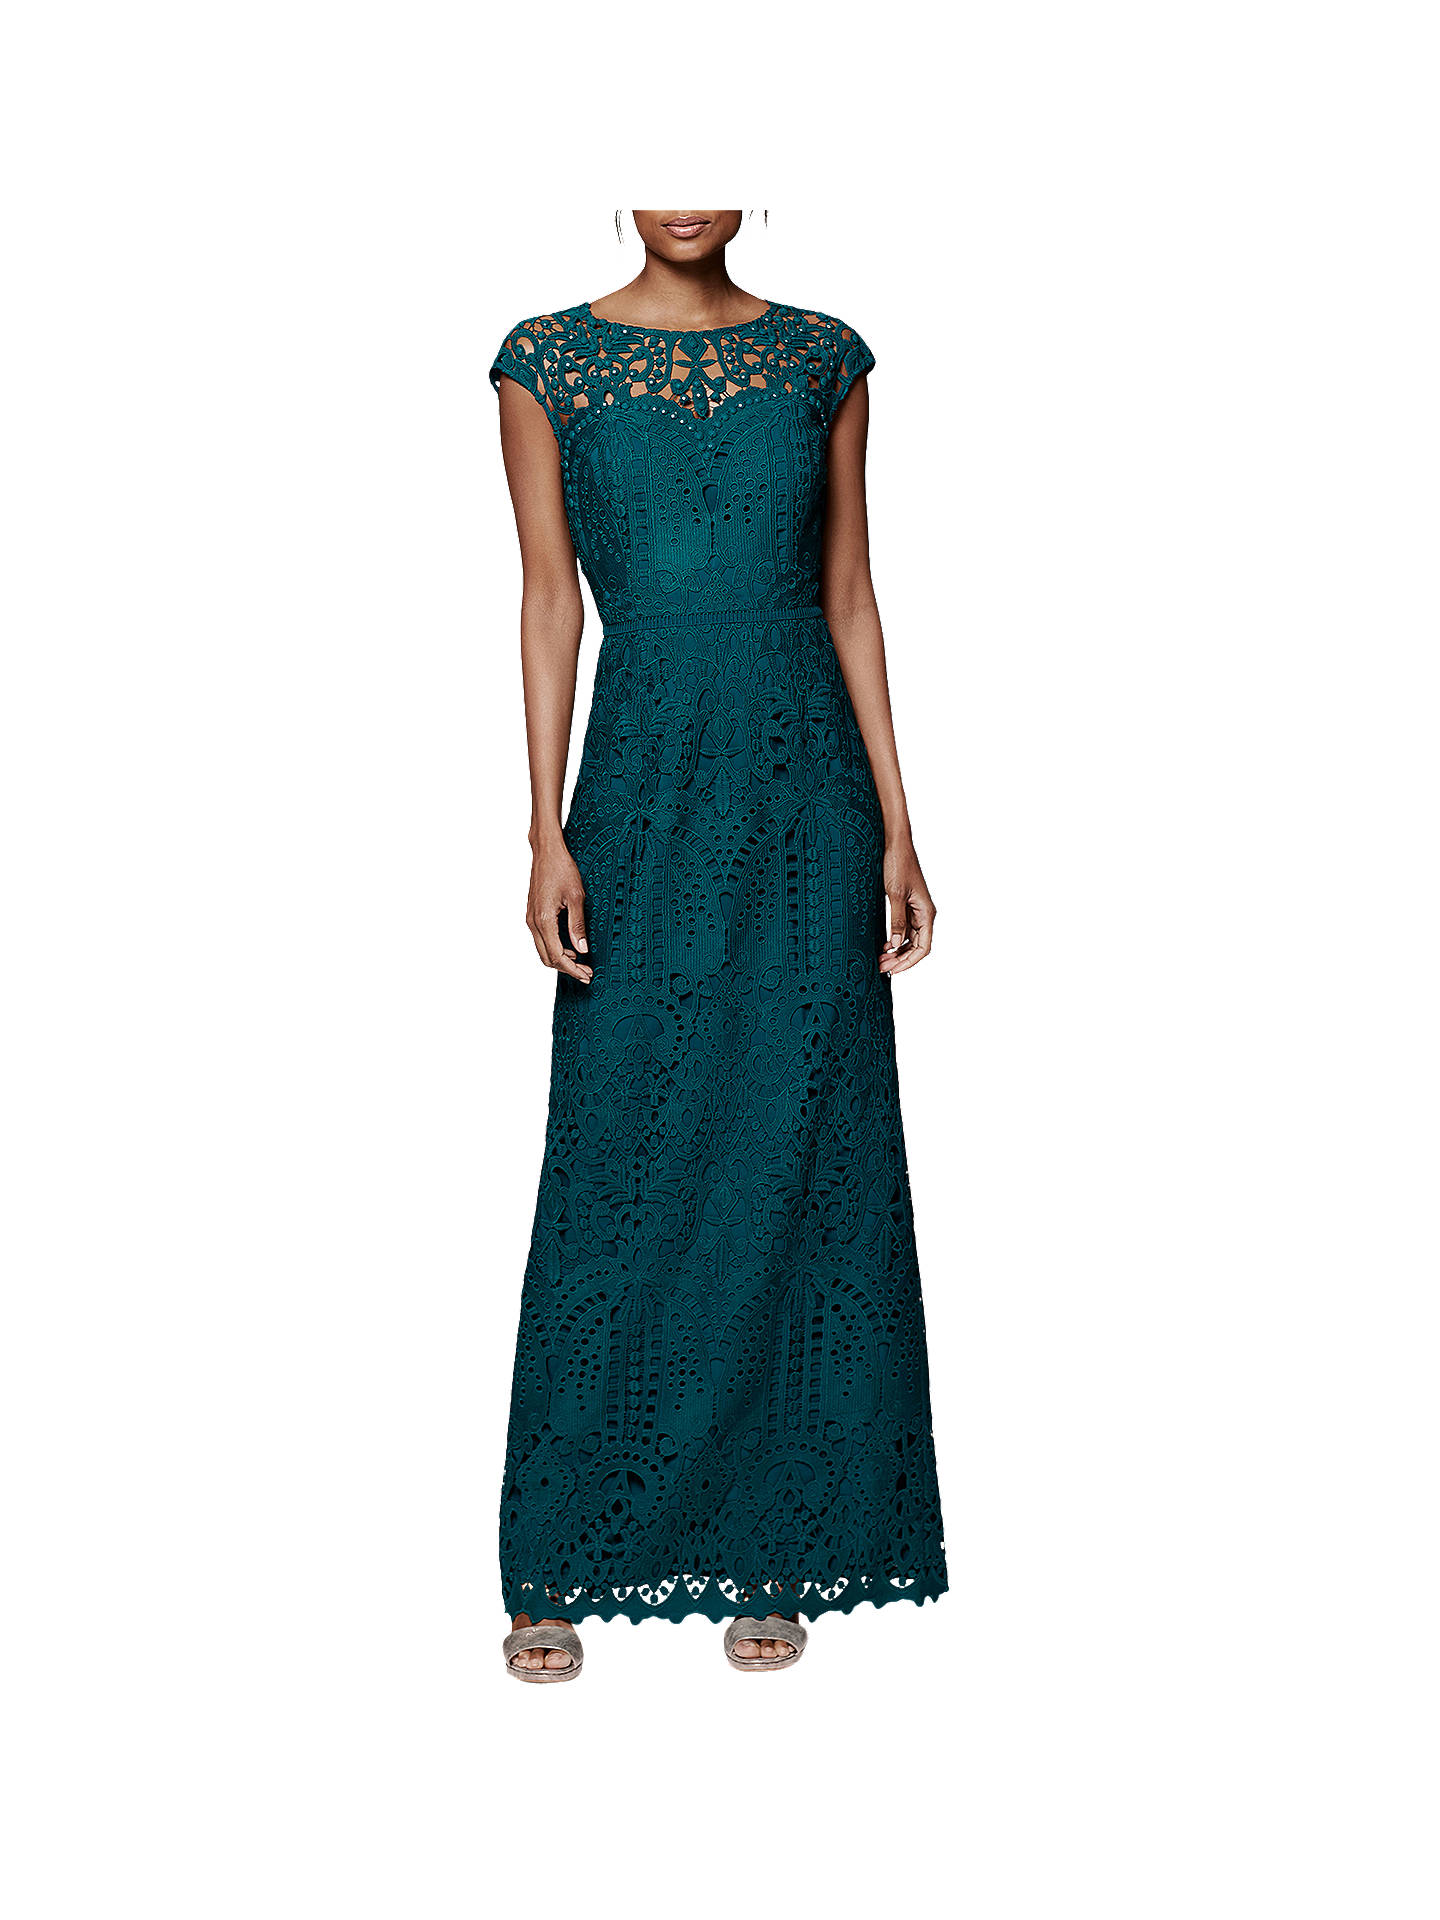 Phase Eight Collection 8 Gloria Lace Dress at John Lewis & Partners